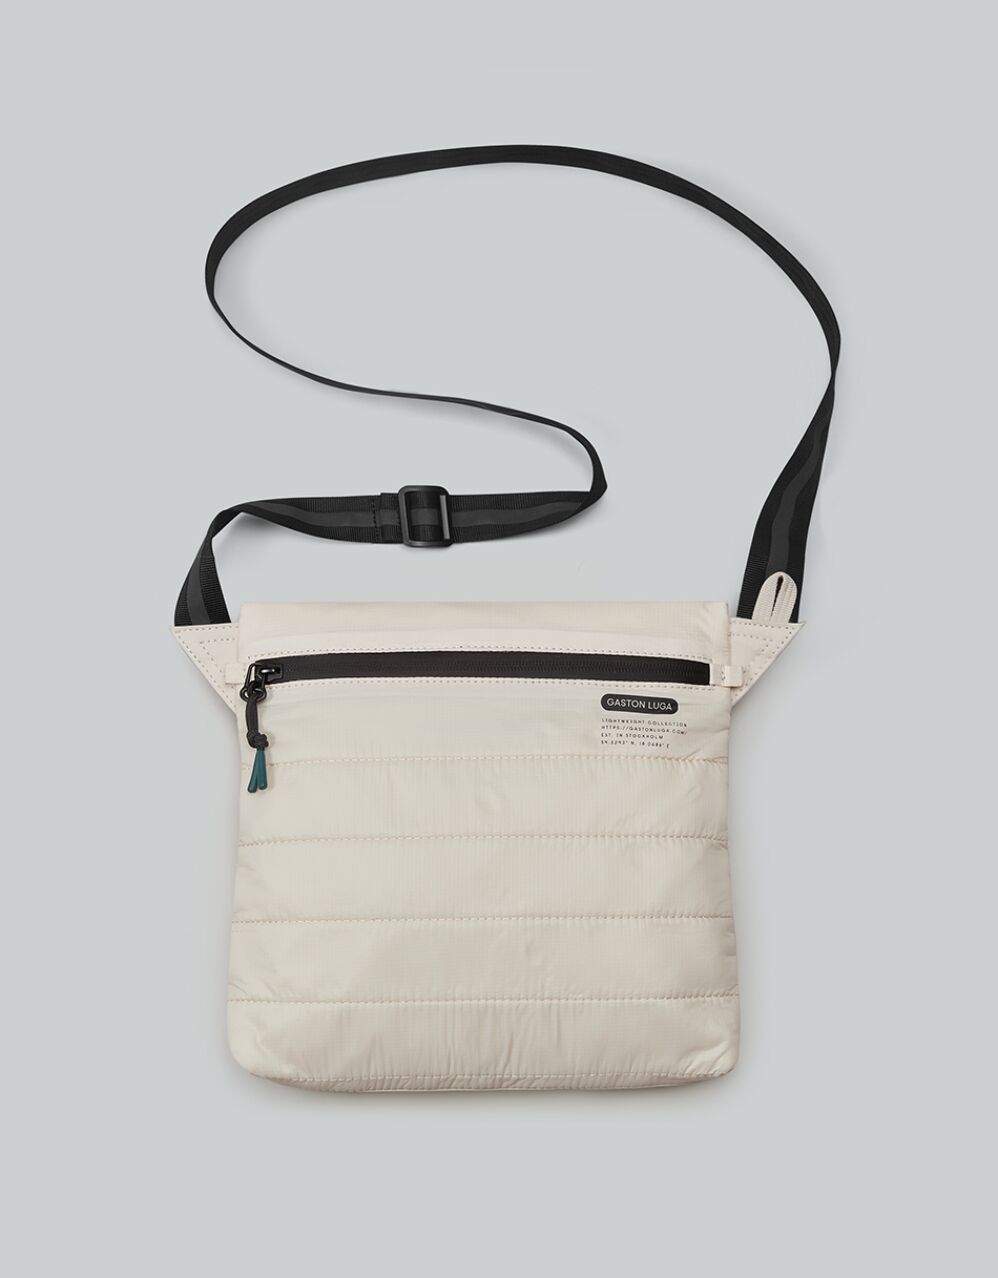 Lightweight Daybag - Take your daily style to the next level